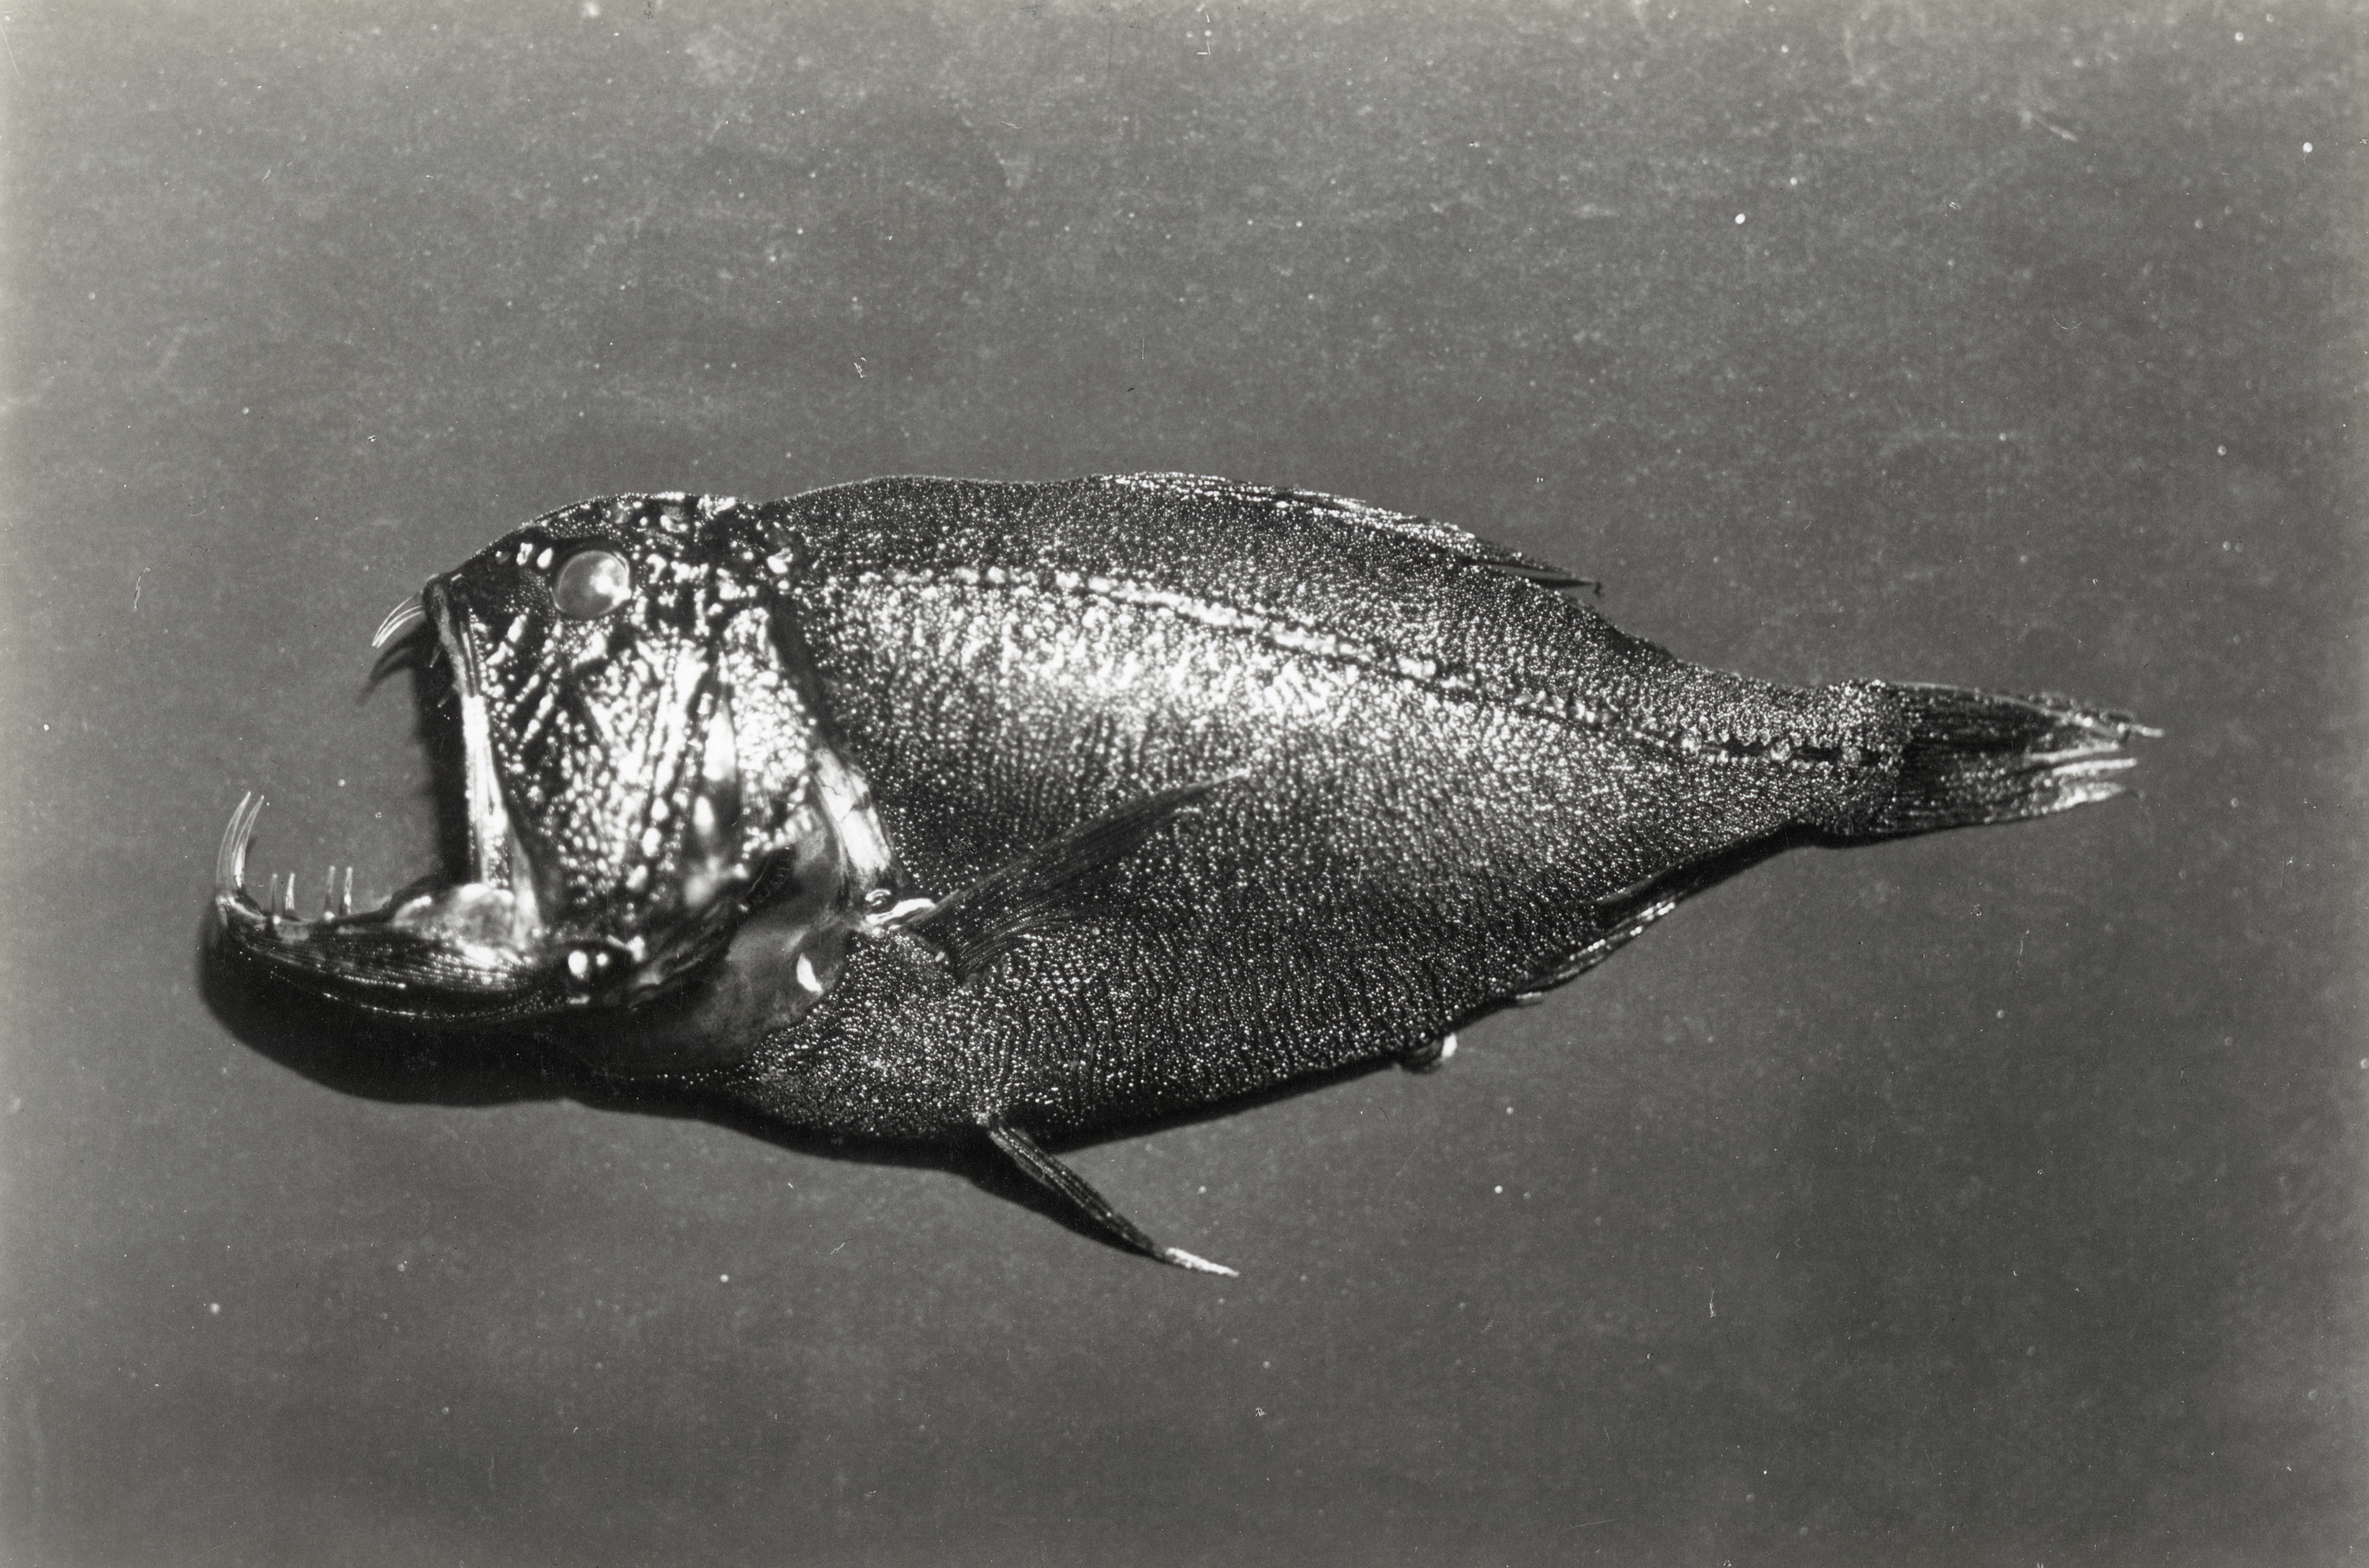 This image shows a common fangtooth or ogrefish collected during &#x27;Discovery Investigations II 1926-7&#x27;, circa 1926.